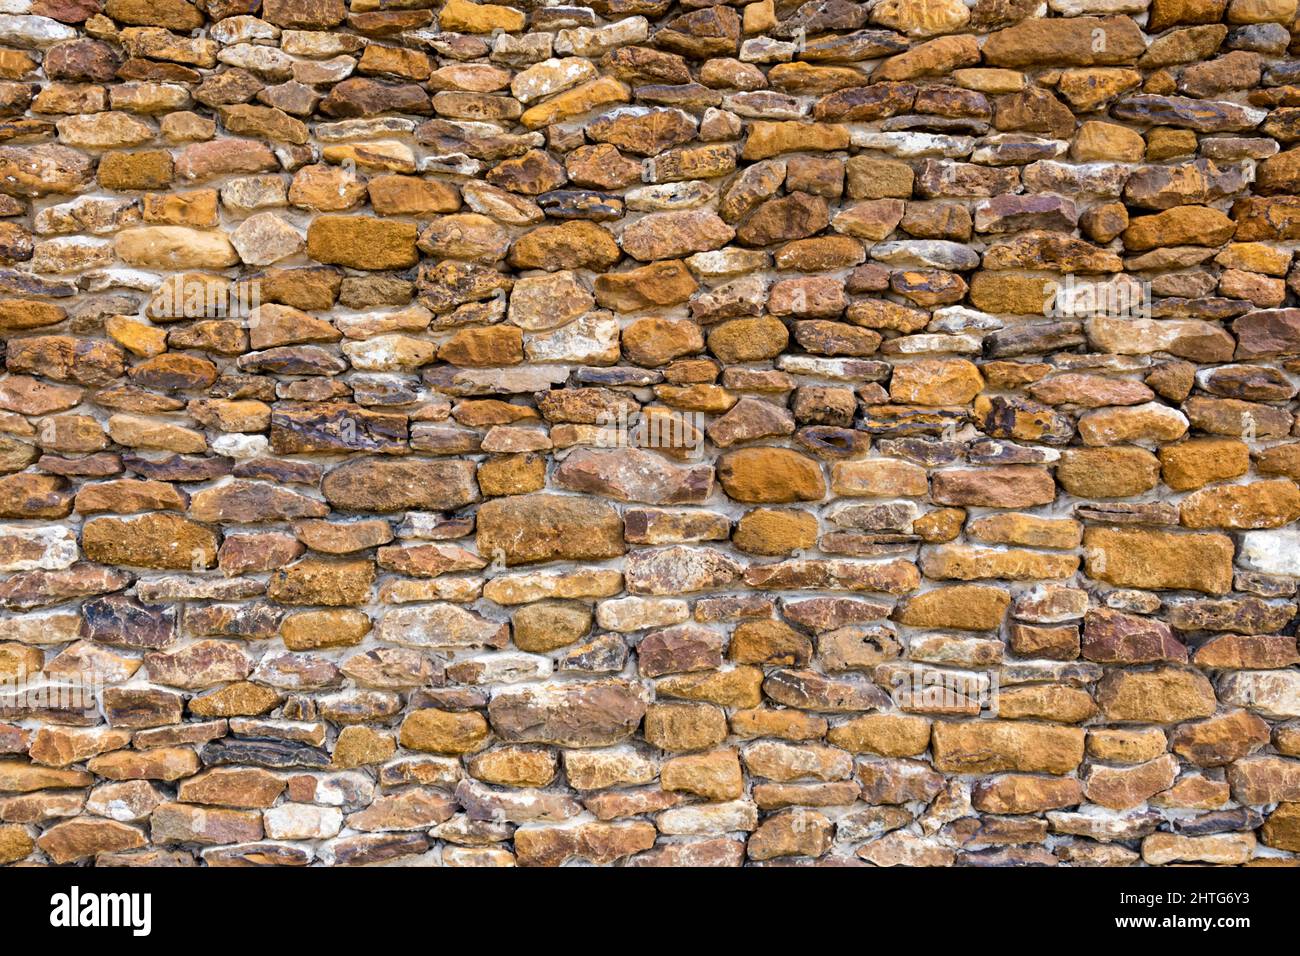 Small blocks of carstone or carrstone used as a building material in the side of a West Norfolk building. Stock Photo